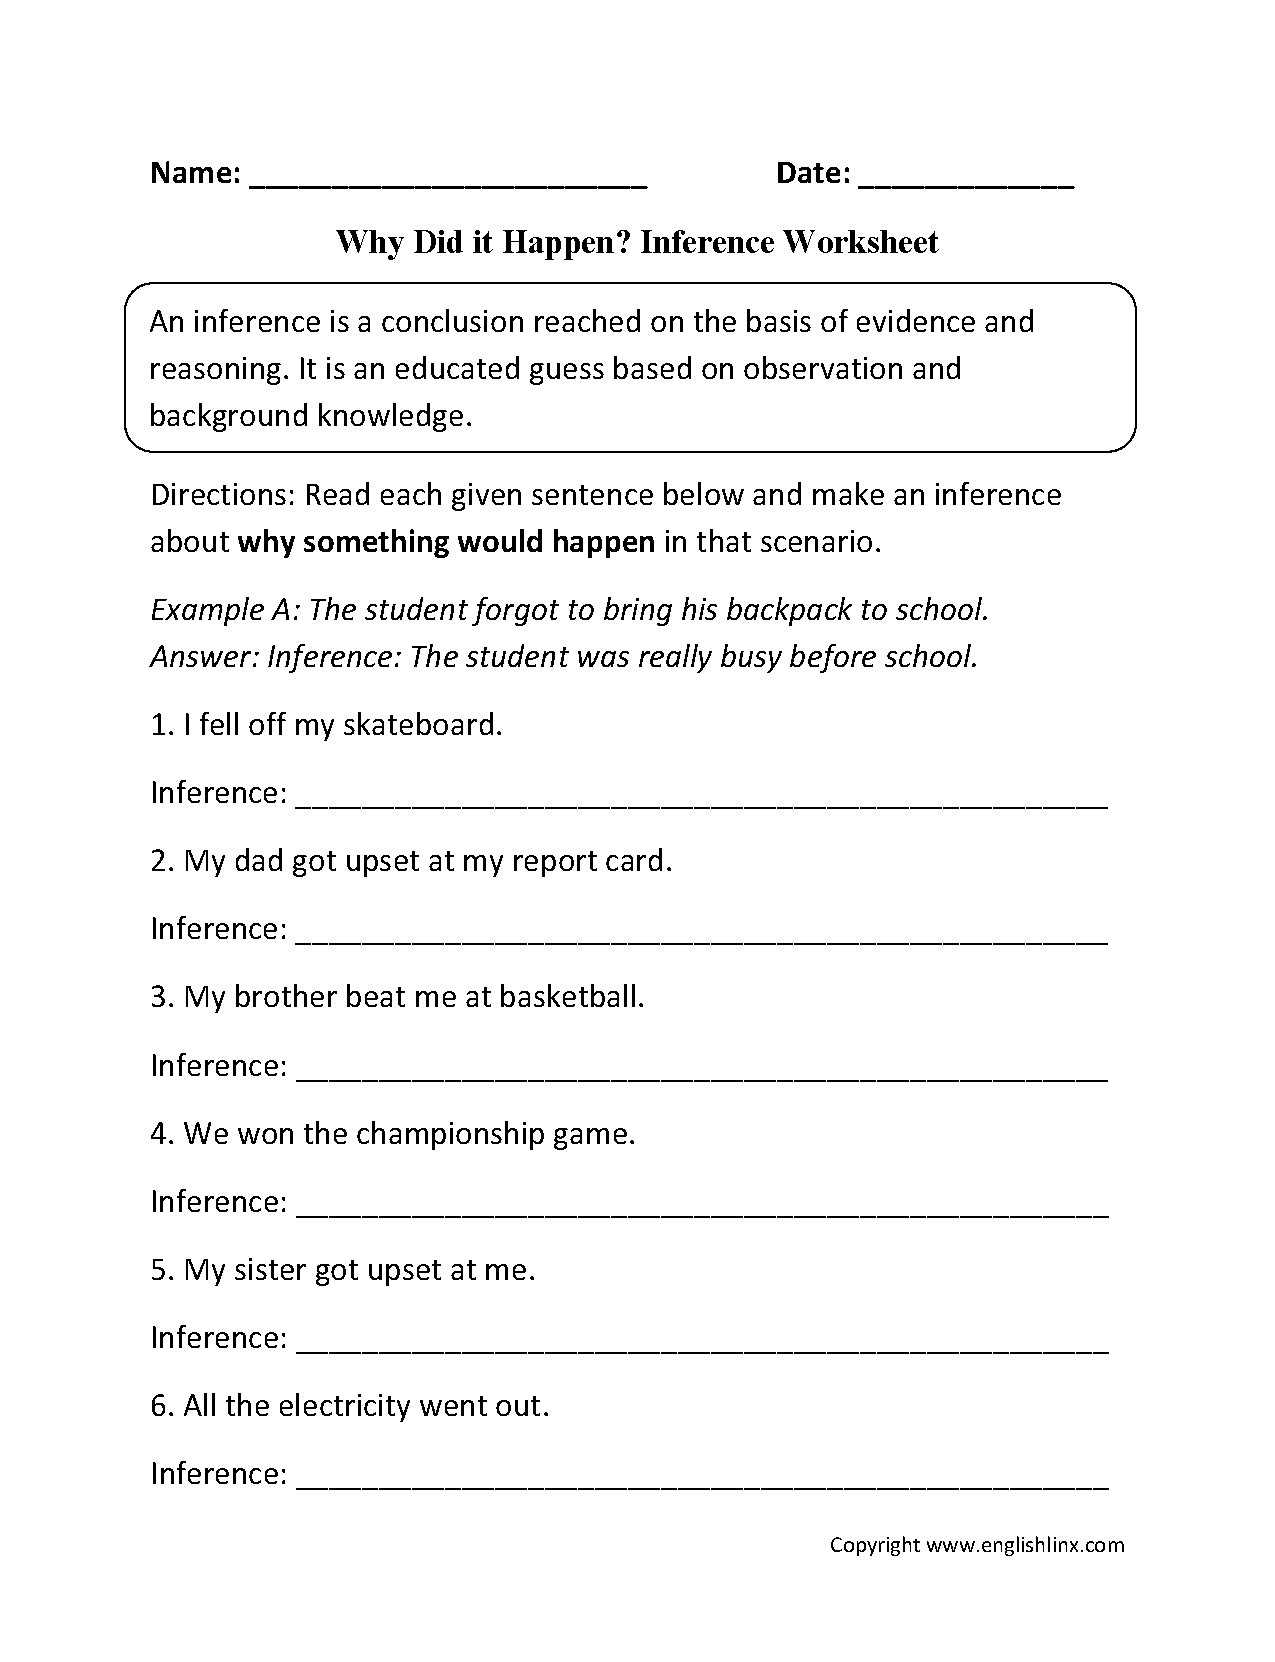 Following Directions Worksheet as Well as What is A School Worksheet Valid School Worksheets for Elementary